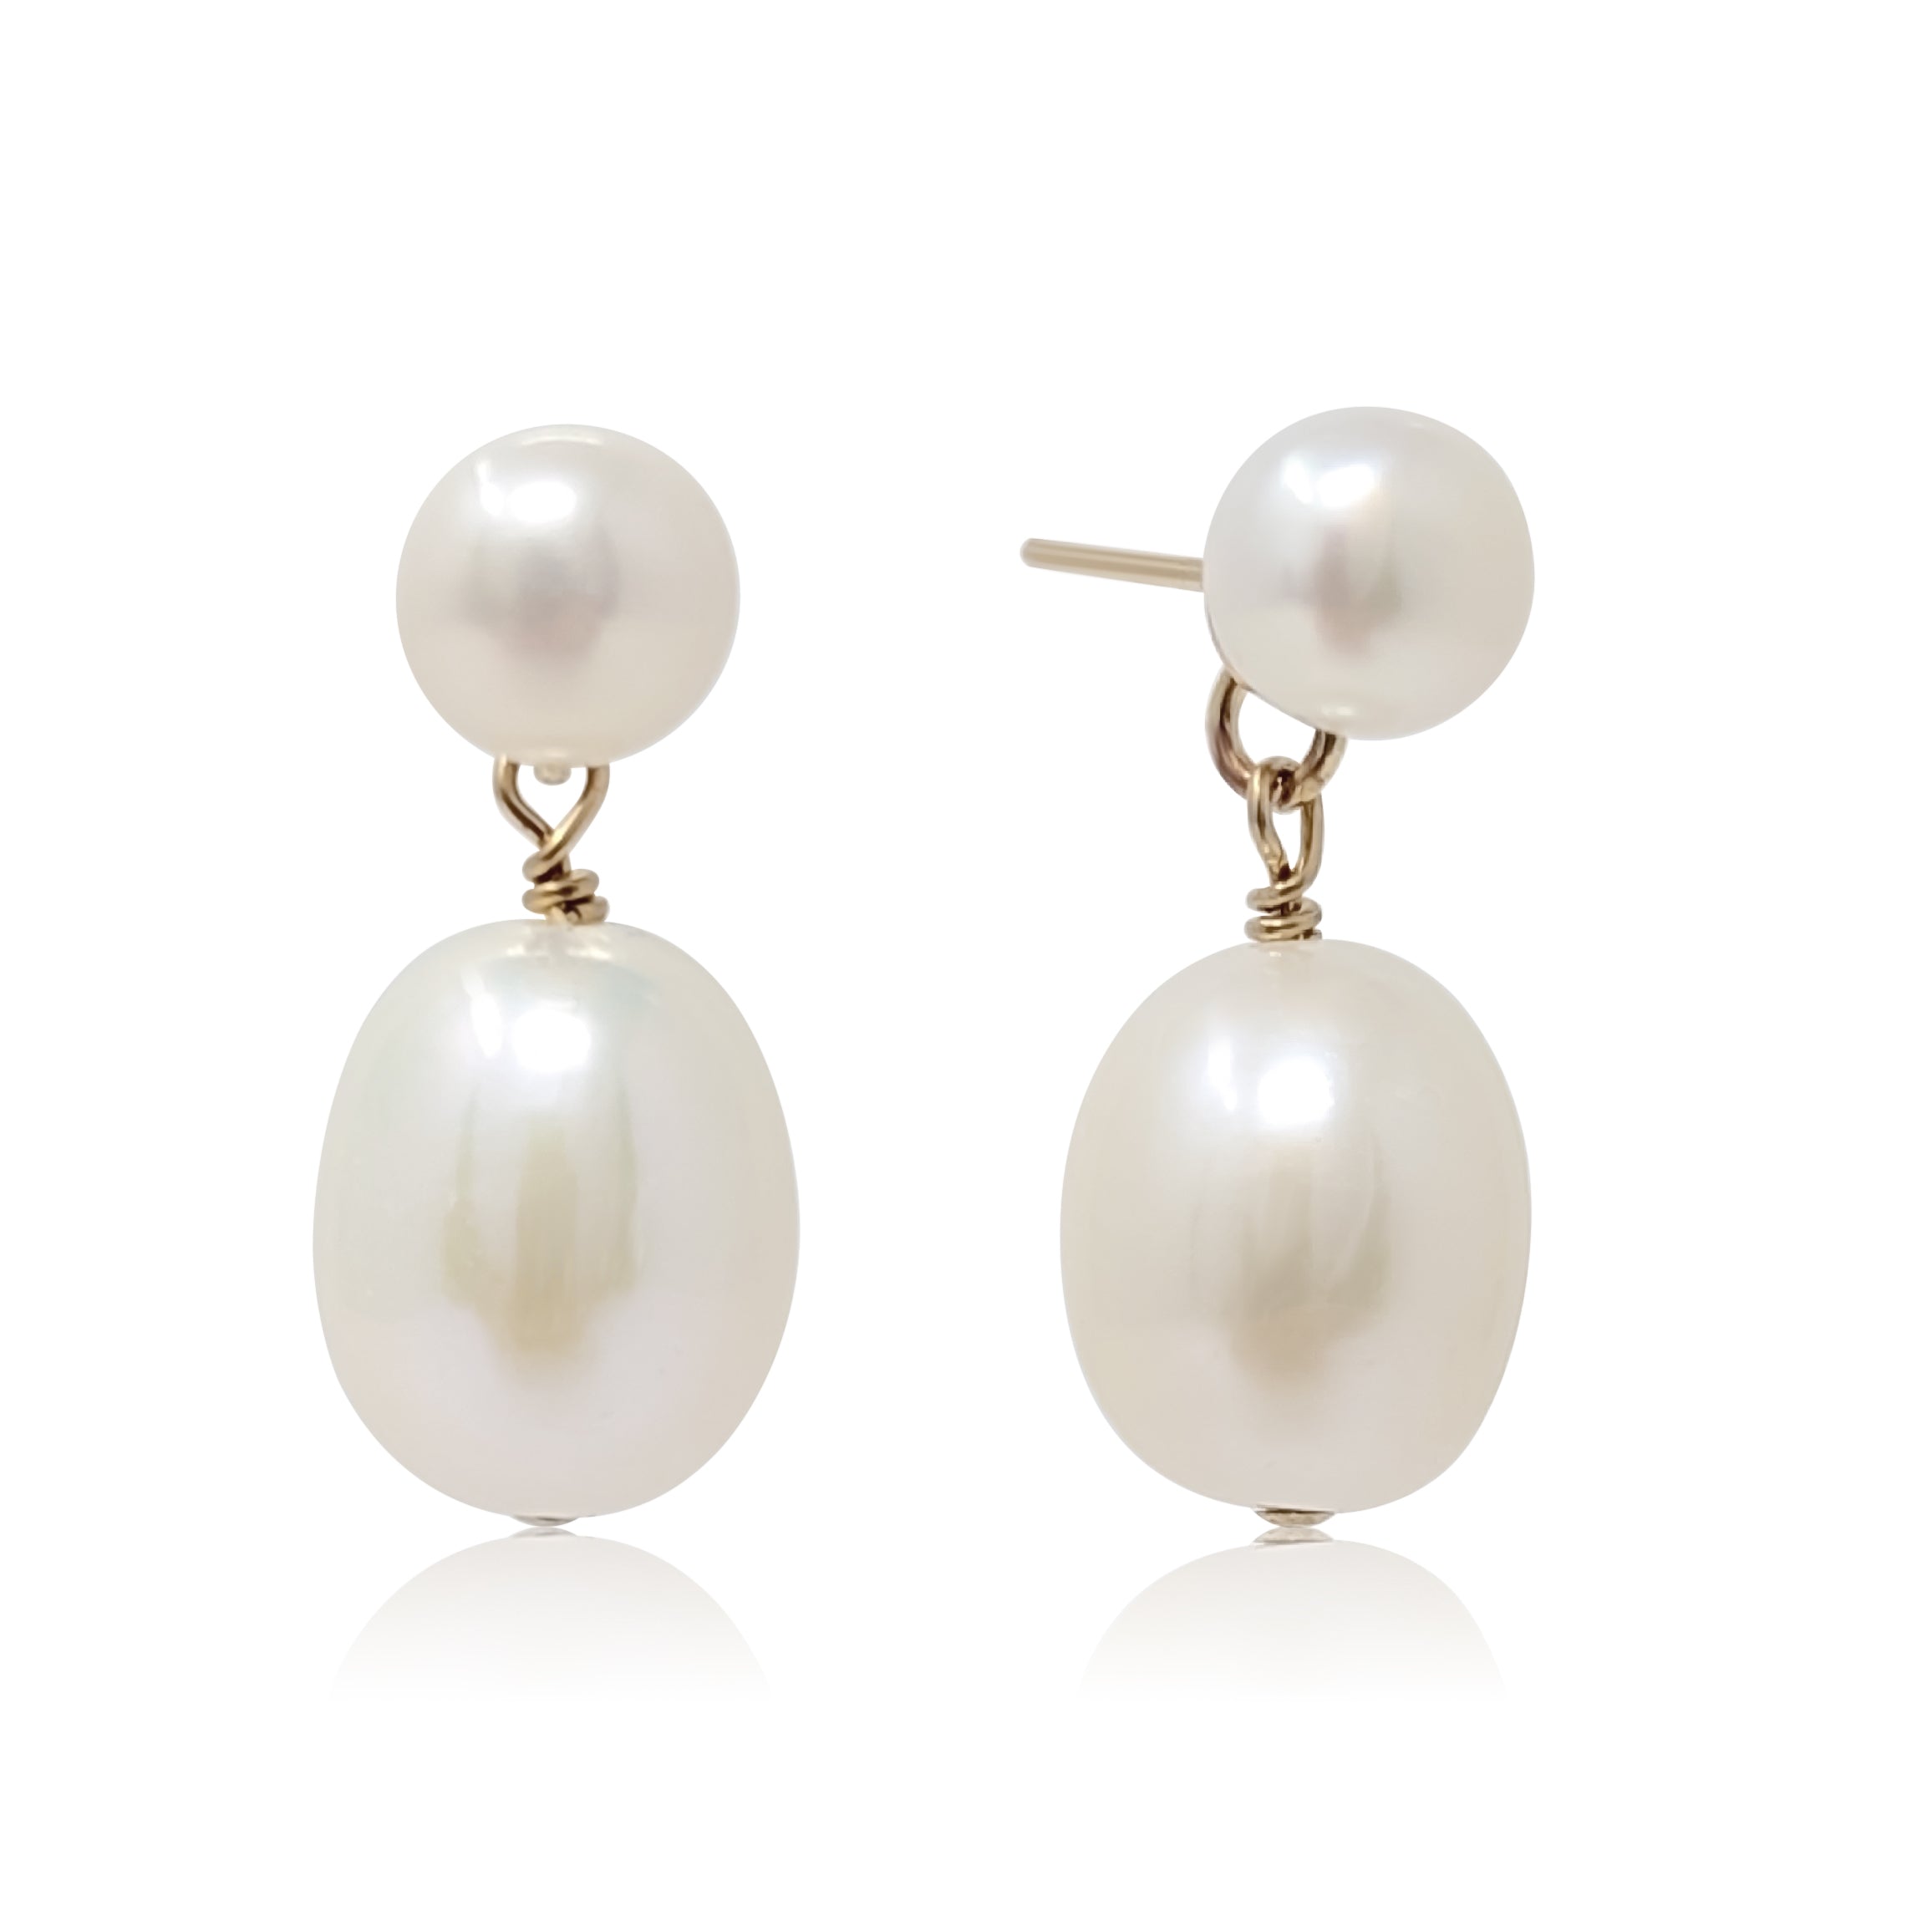 Gold filled pearl drop stud earrings on white background